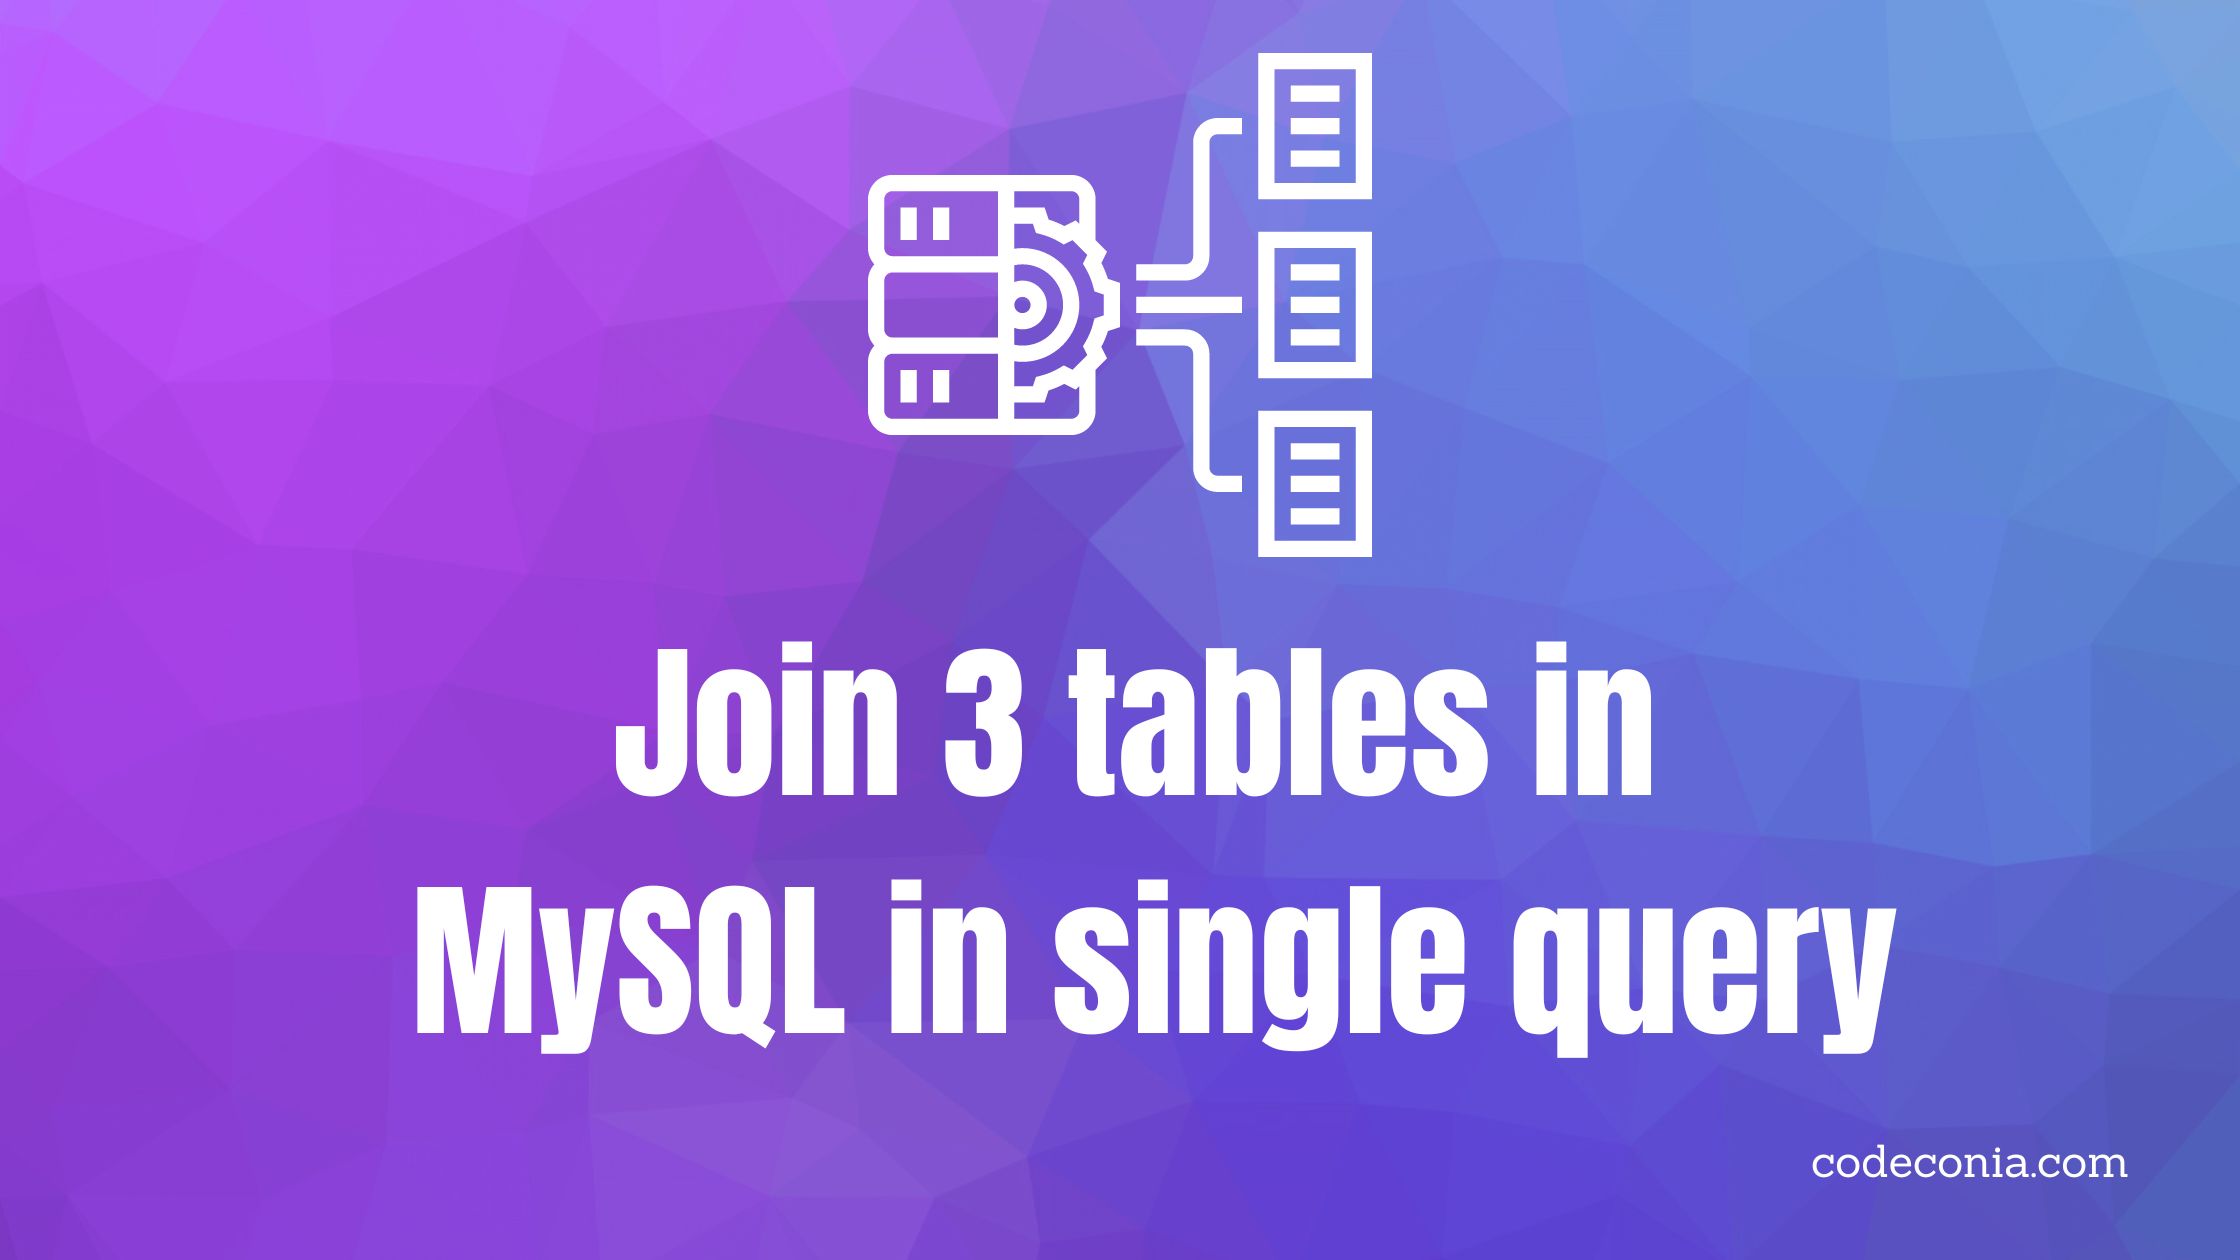 Join 3 tables in MySQL in single query